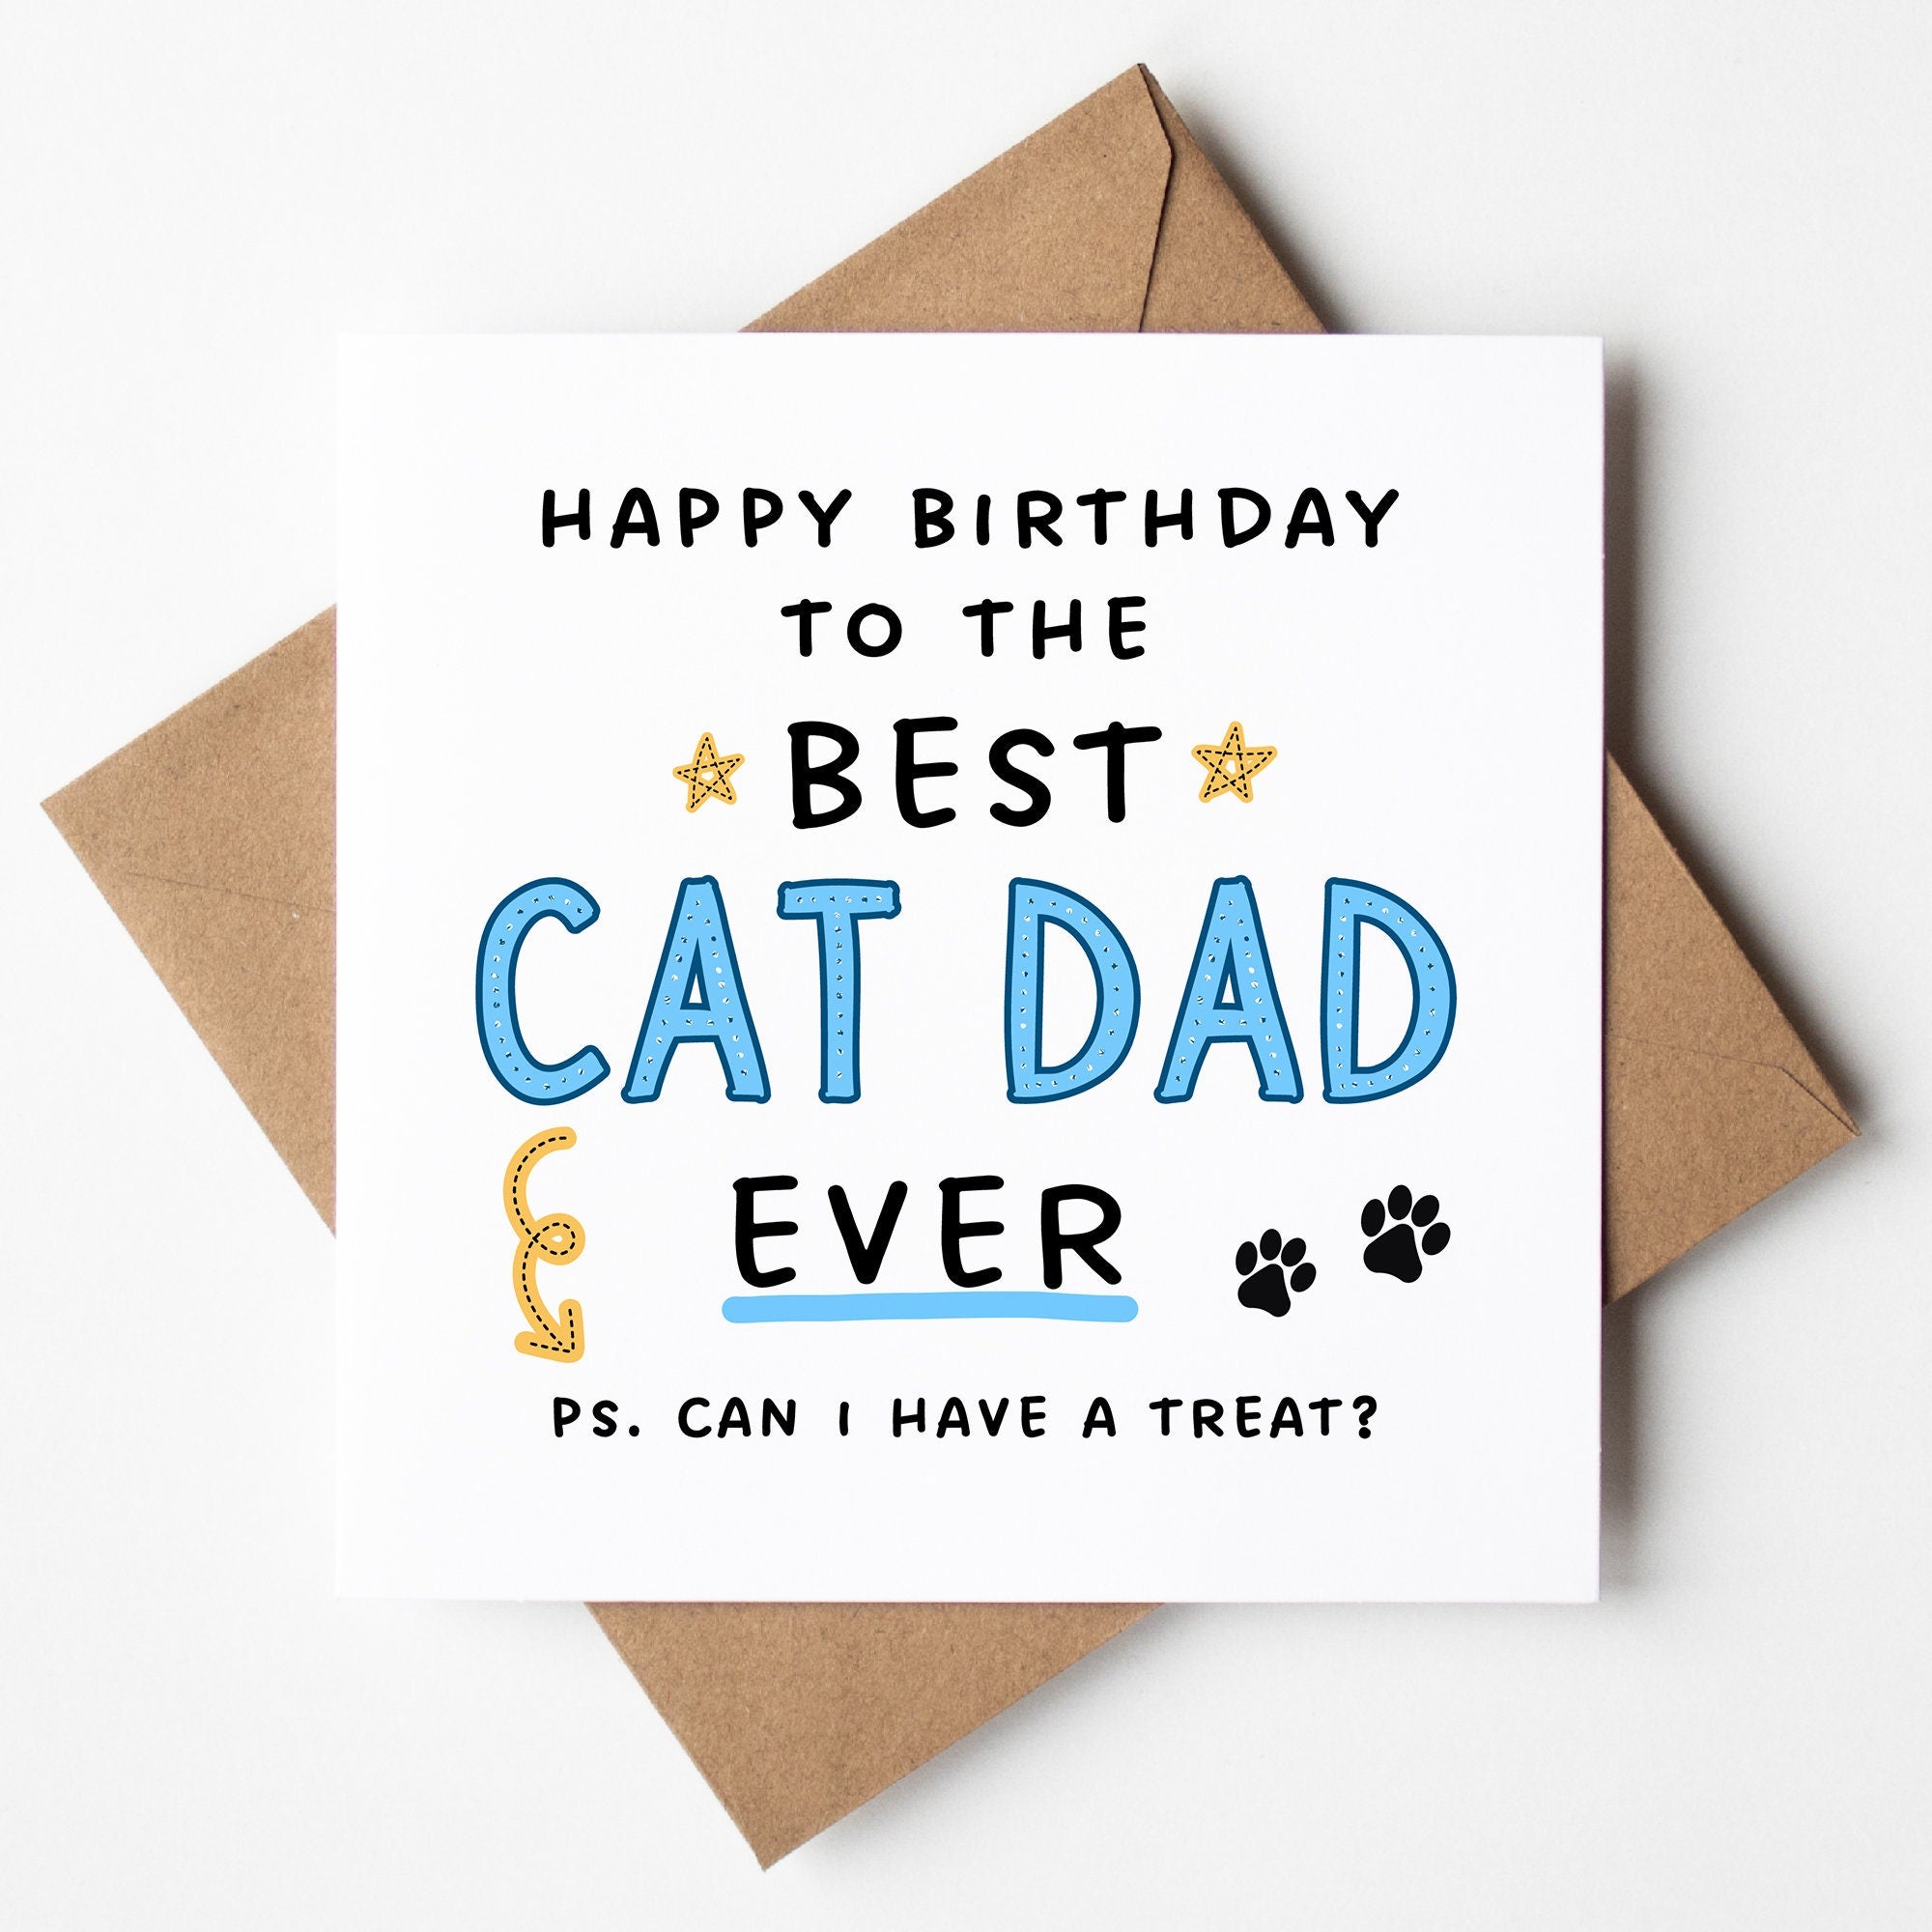 Happy Birthday To The Best Cat Dad Ever - Funny Card From the Cat - Husband Cat Birthday Card - Boyfriend Cat Birthday Card